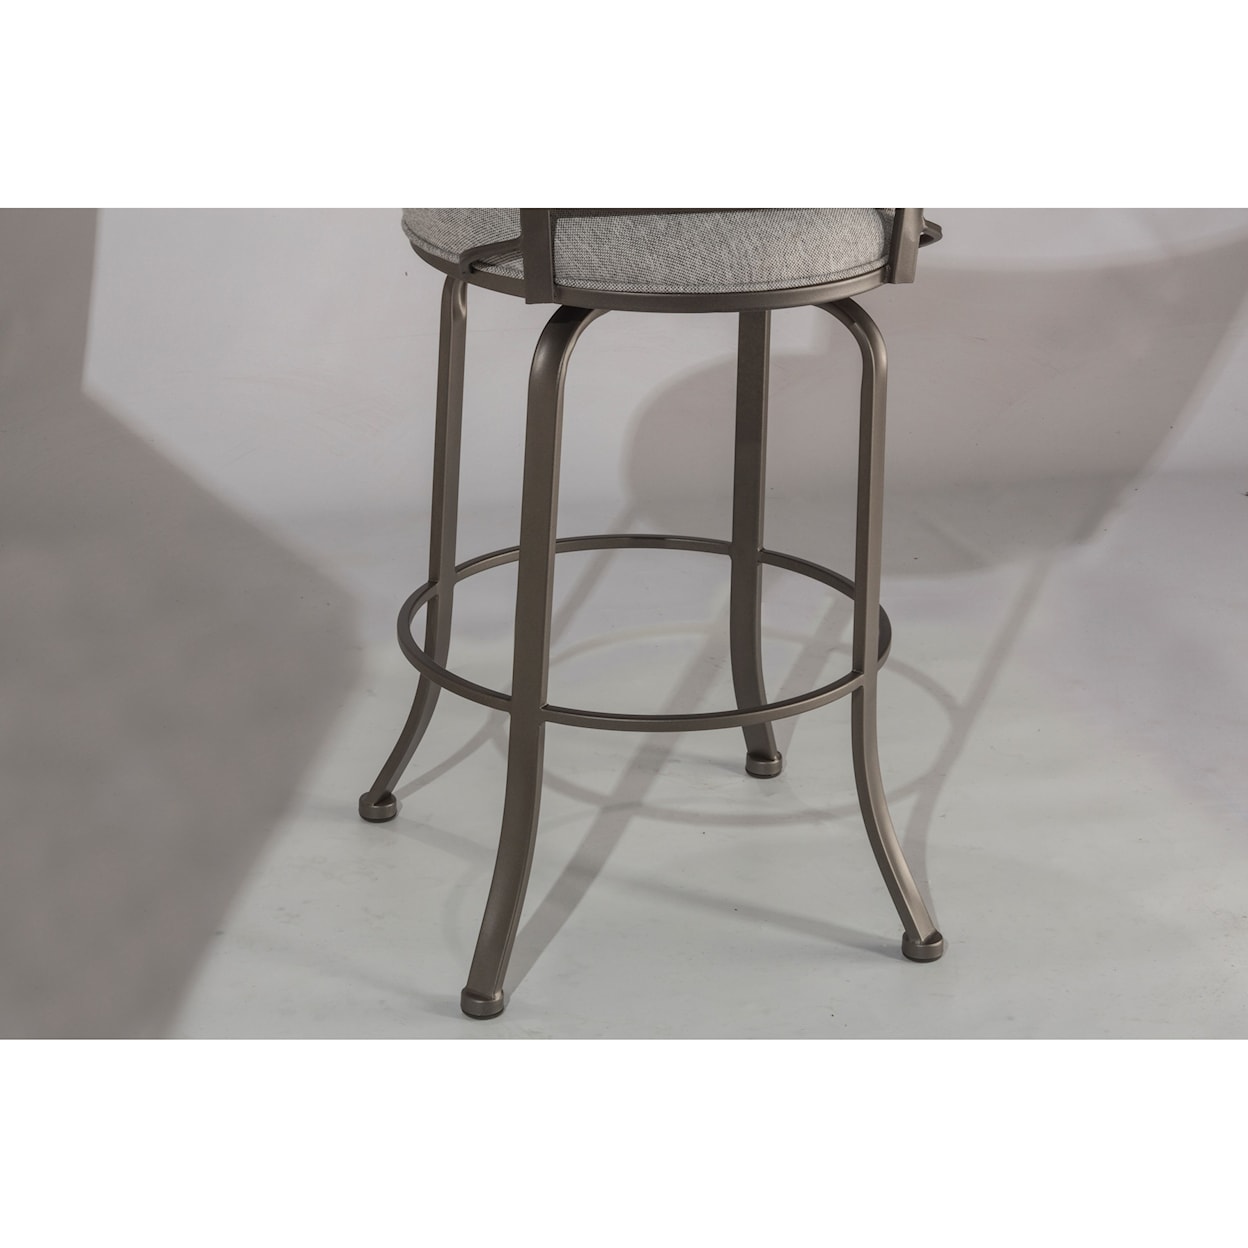 Hillsdale Belle Grove Commercial Grade Stools Counter Height Stool